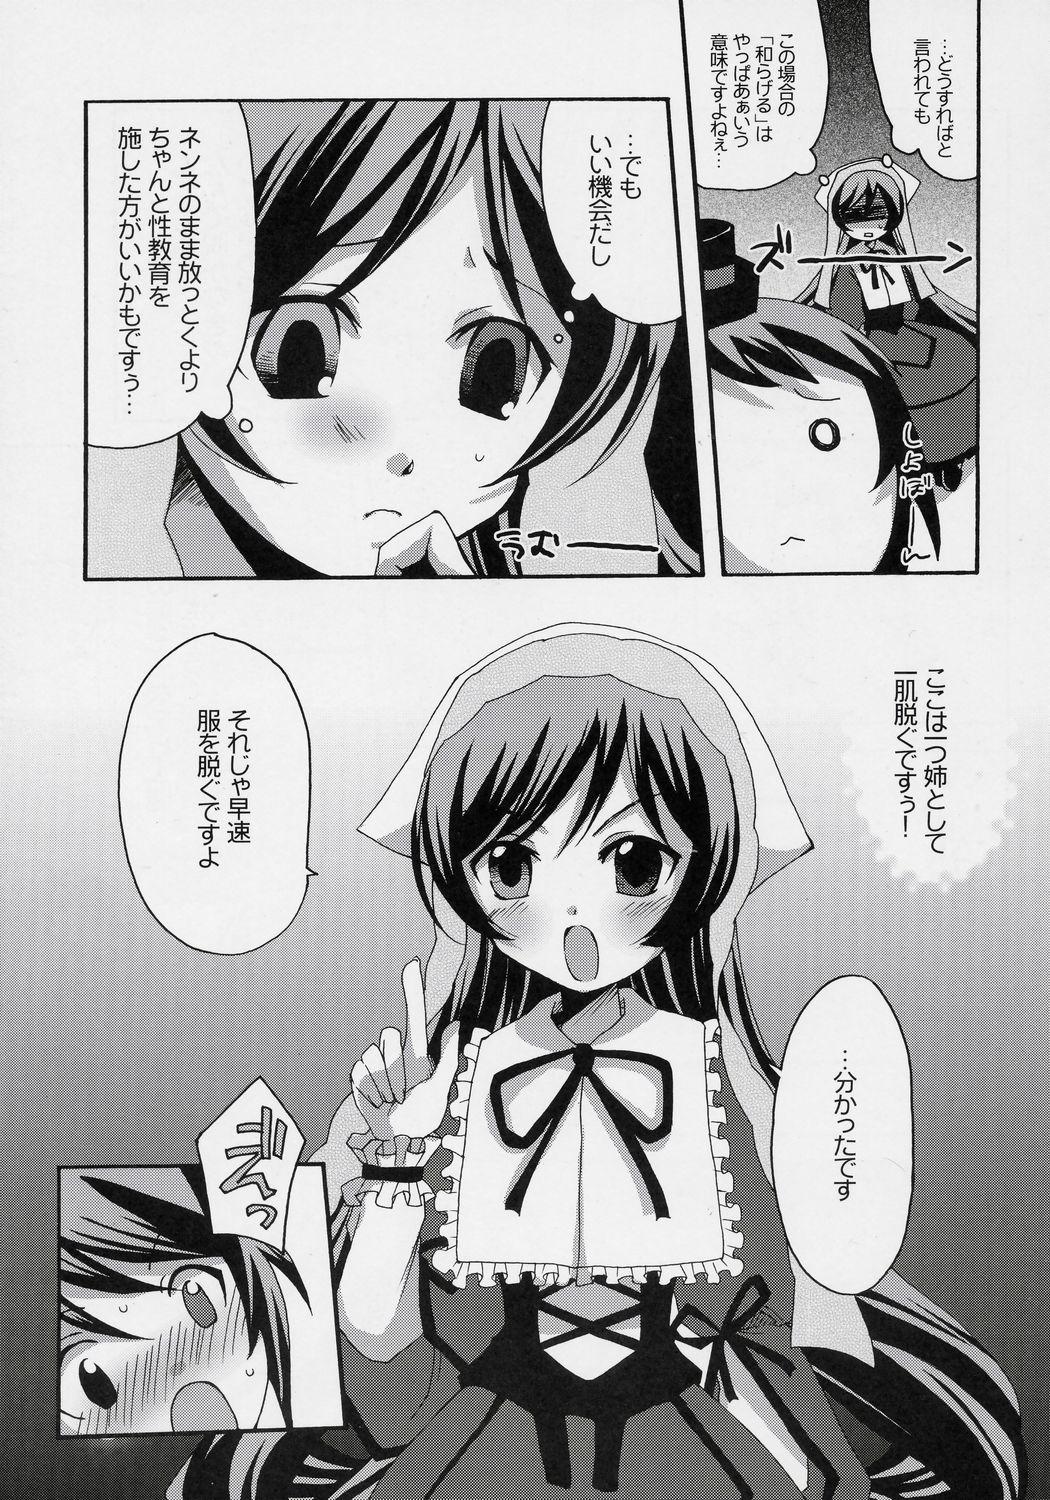 Gays Heart no Tsubomi - Rozen maiden Belly - Page 8